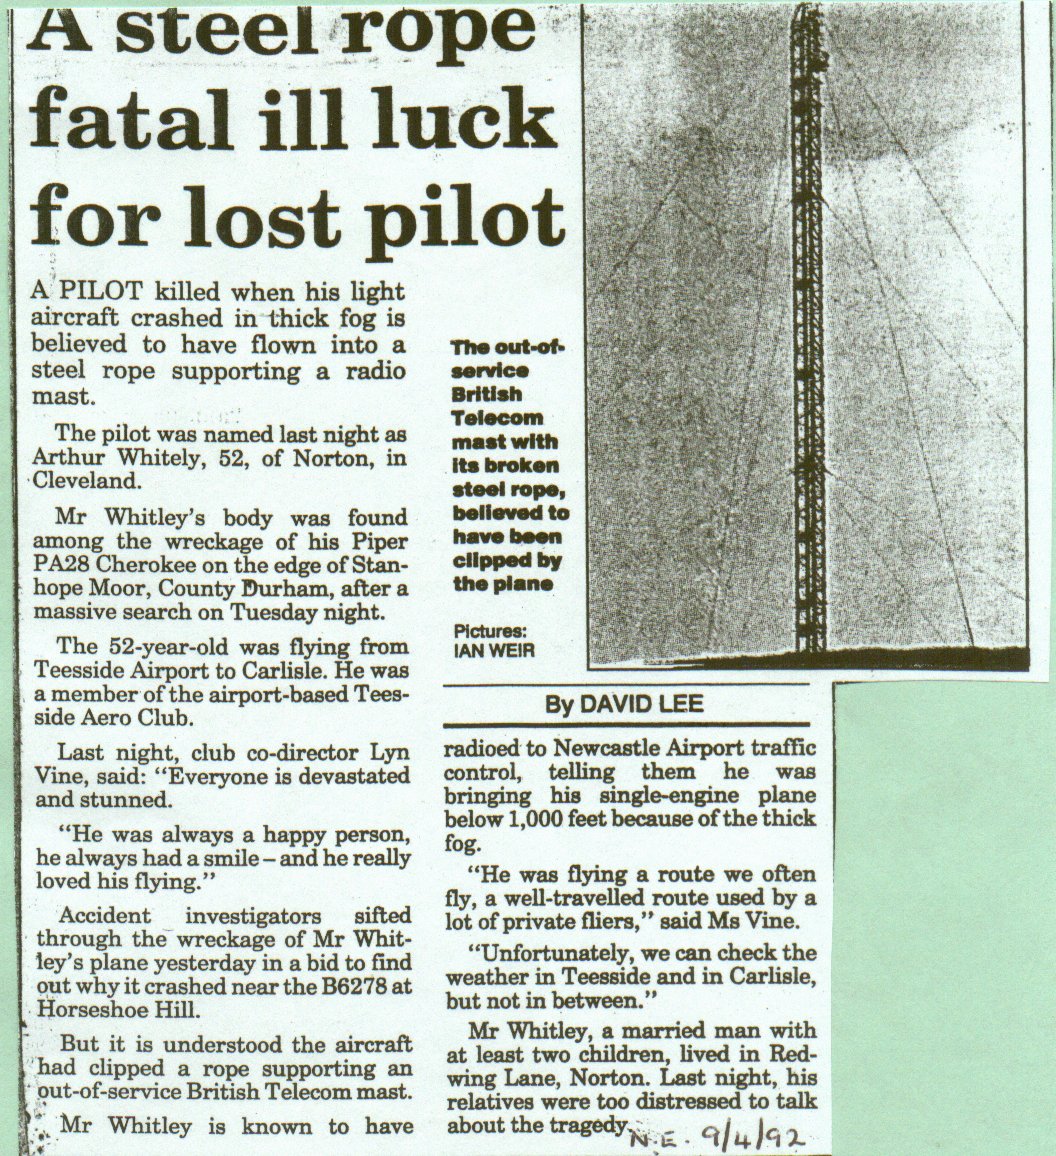 A steel rope - fatal ill luck for lost pilot